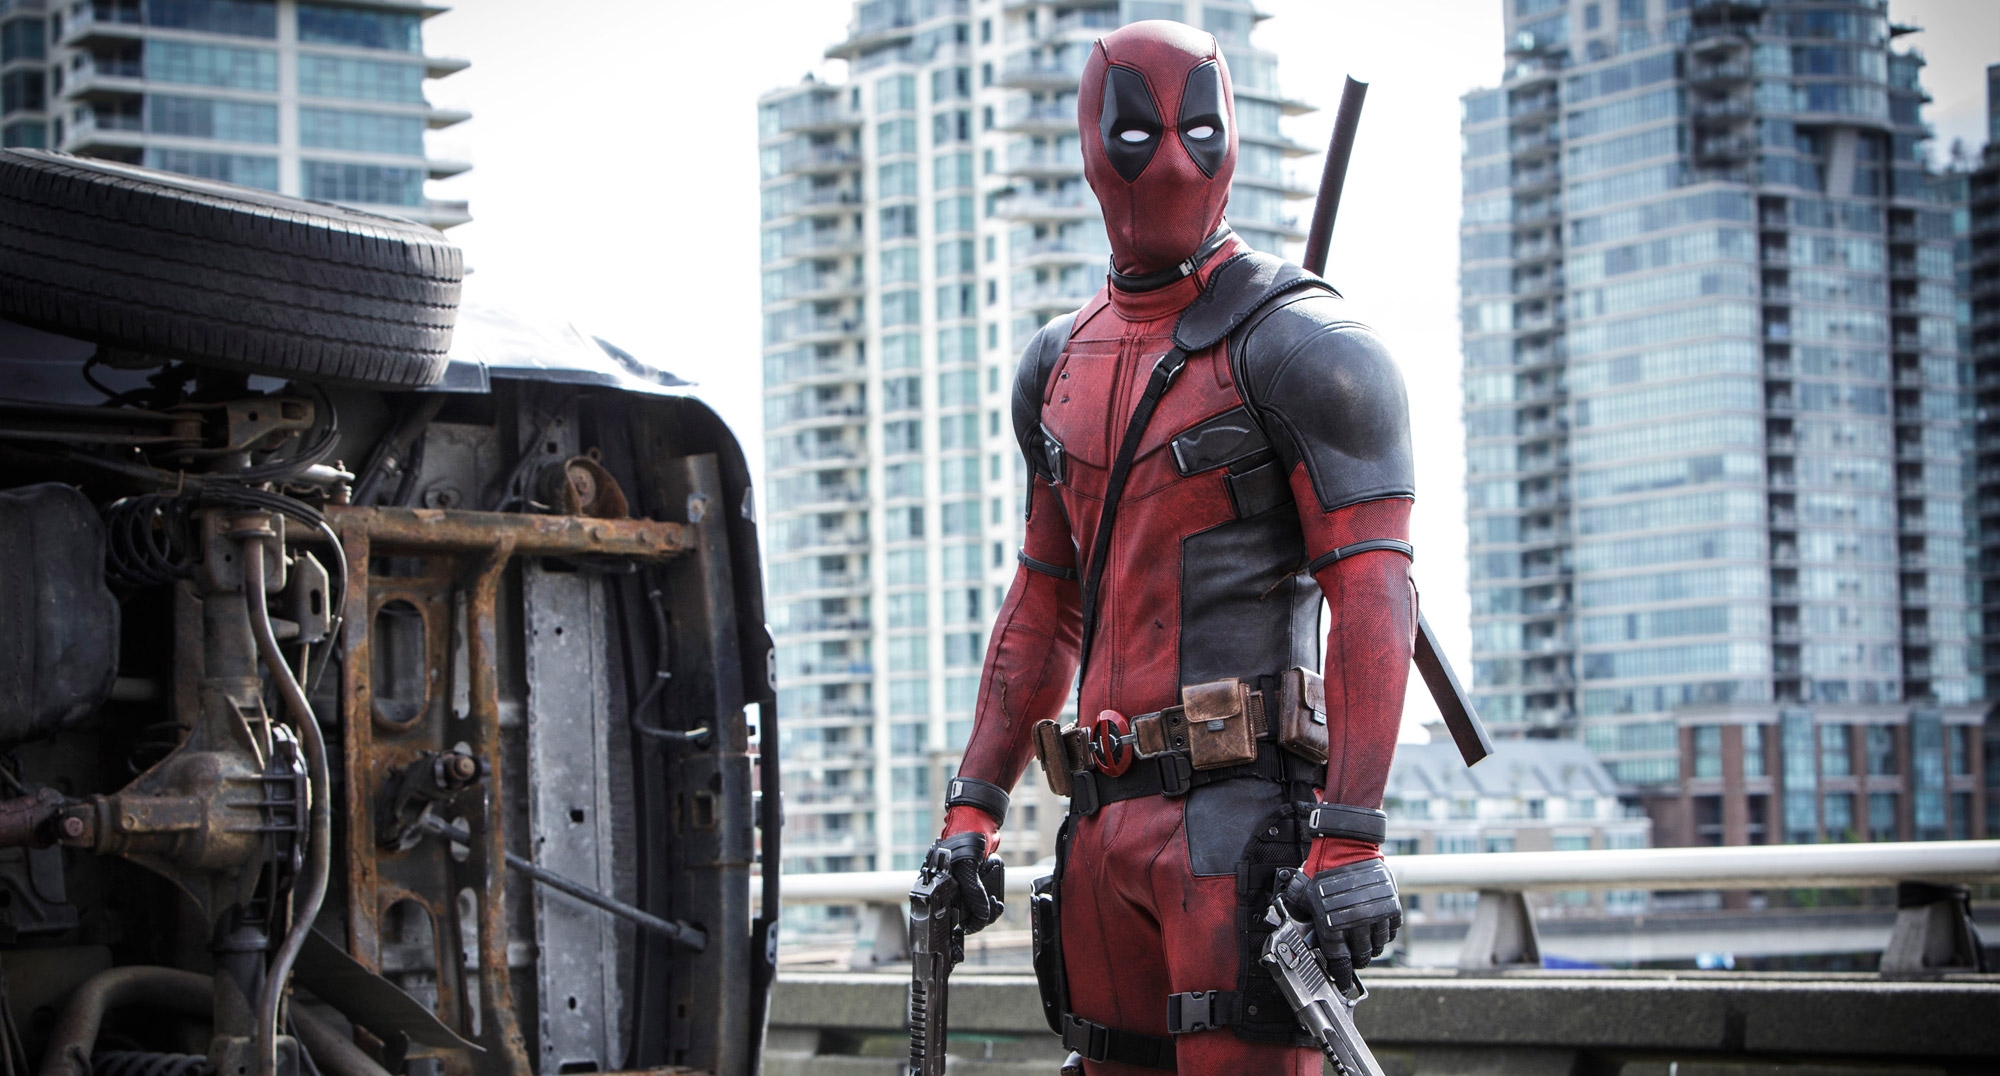 Ryan Reynolds shares new set photo in celebration of Deadpool 2's early release date